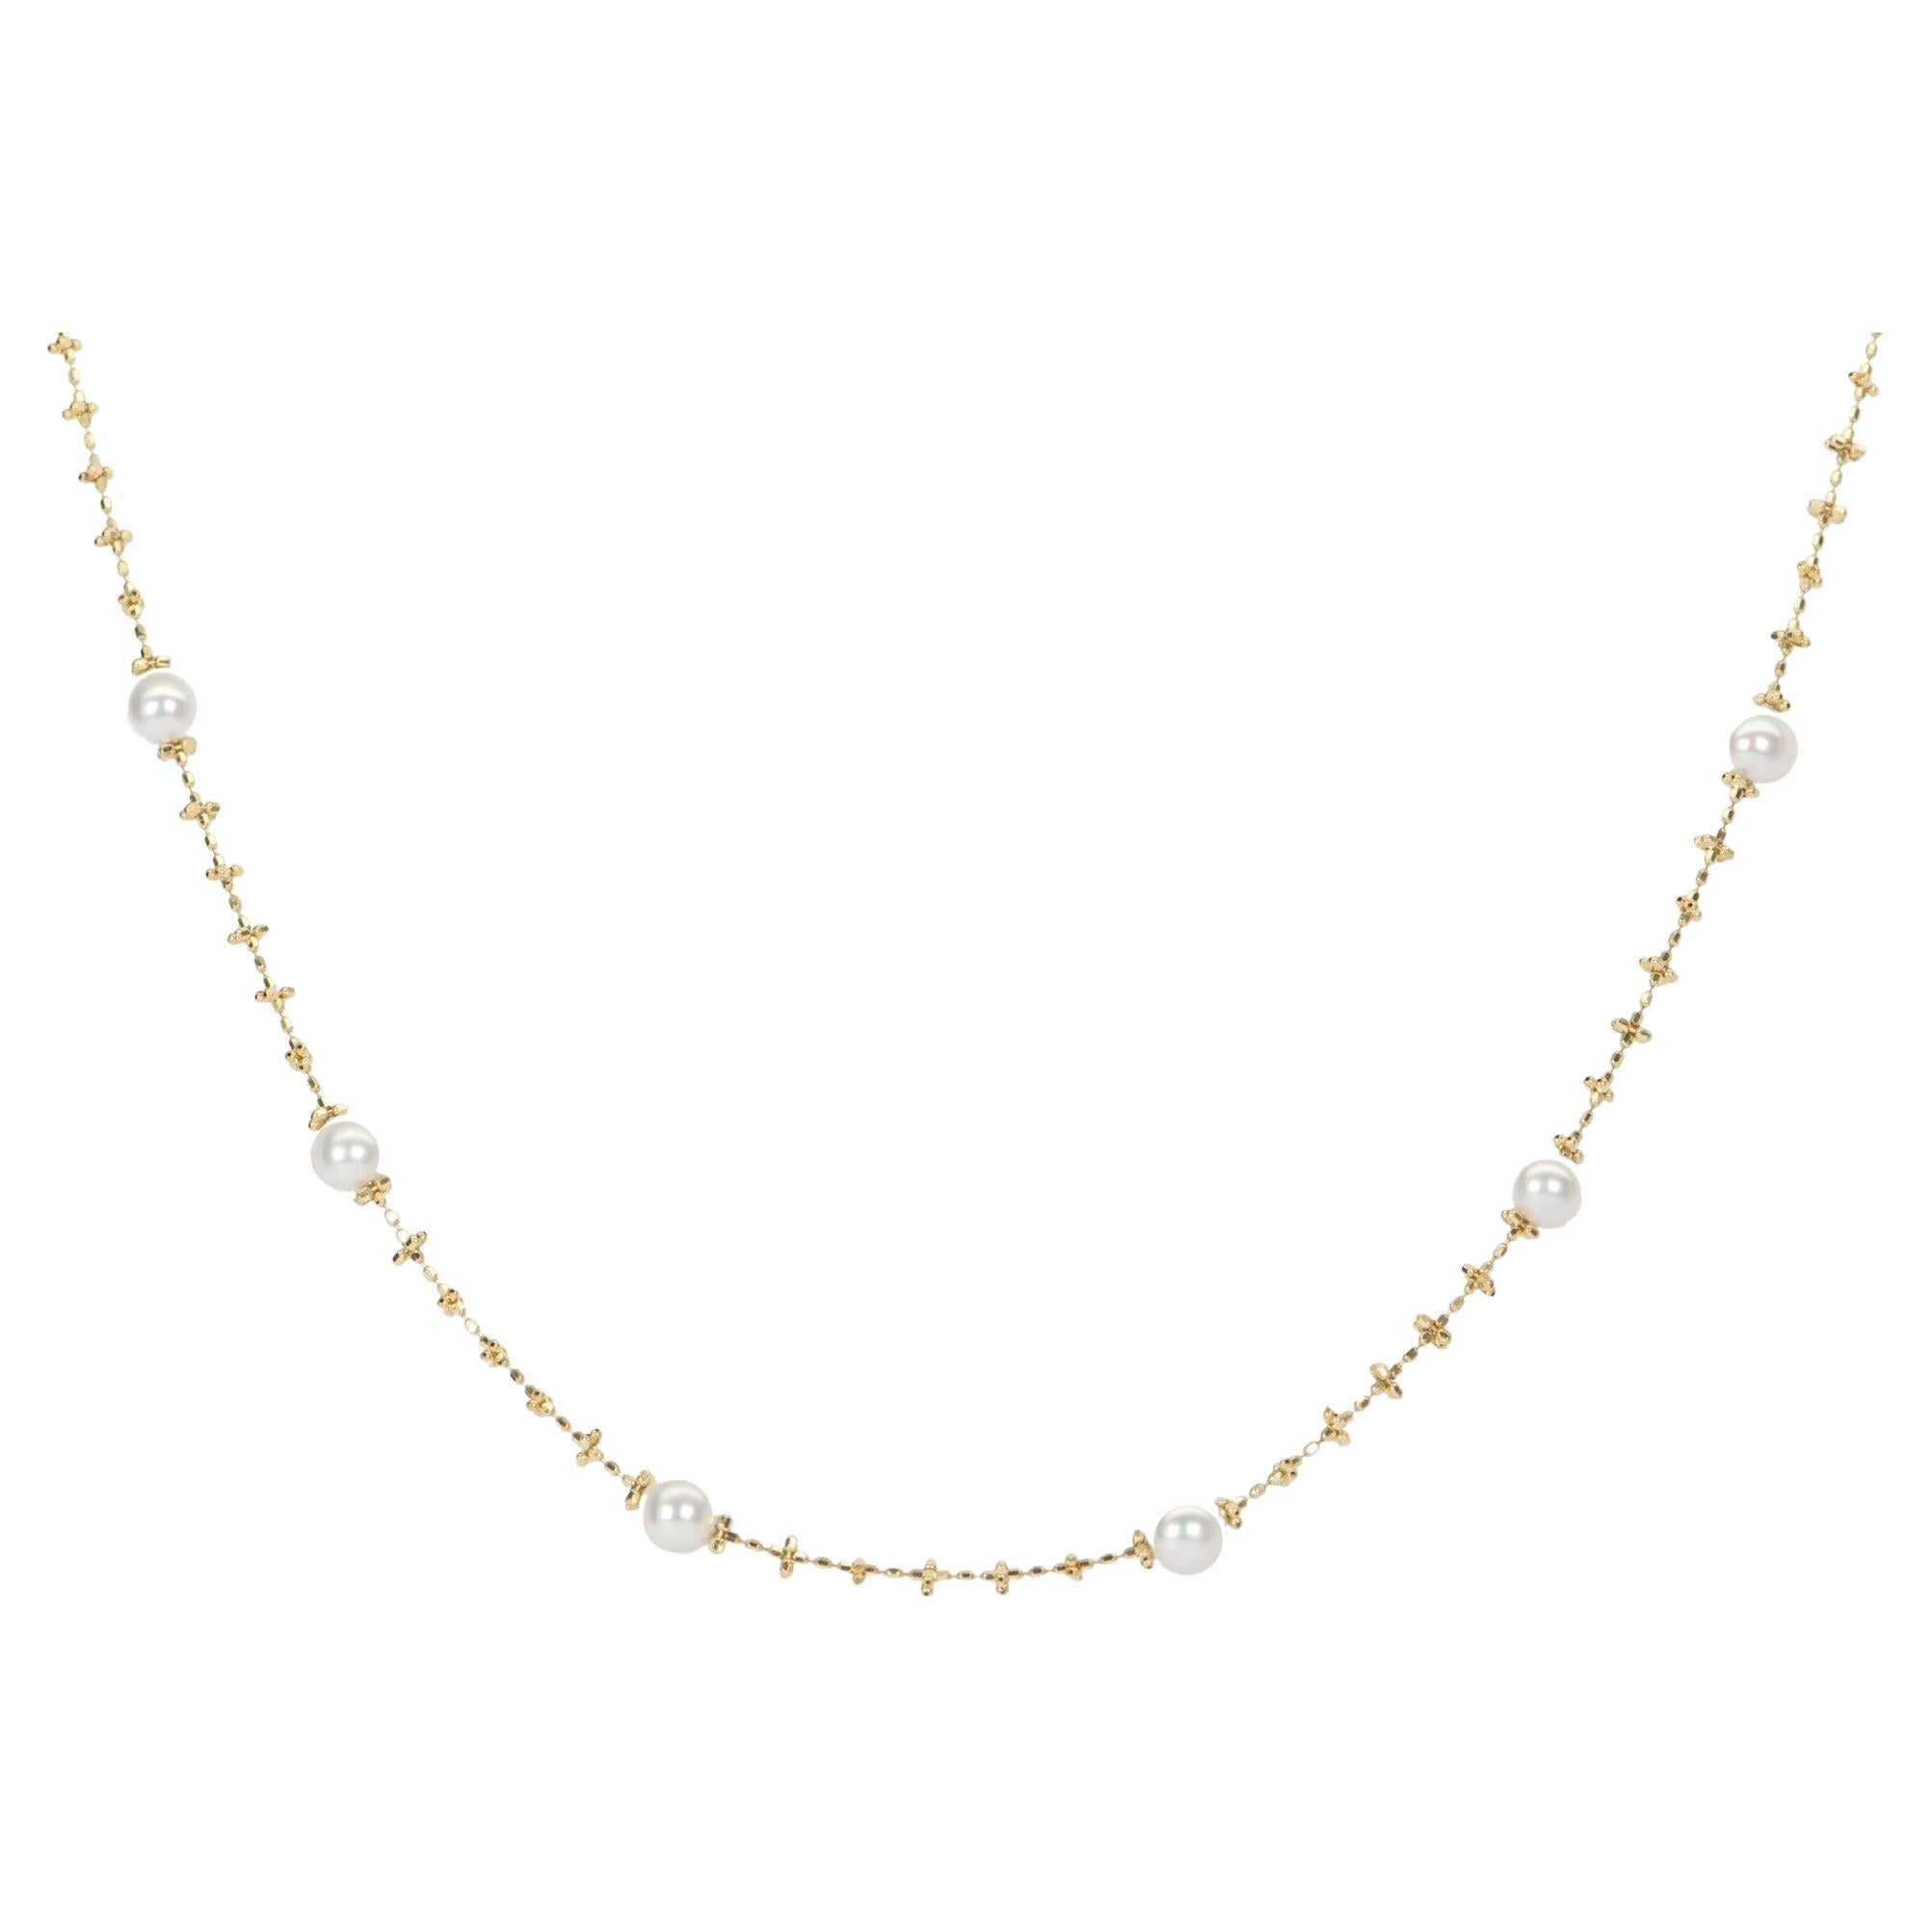 Dainty Freshwater Pearl on Shiny 18k Gold Chain Necklace OOAK Gift for Her R4365 For Sale